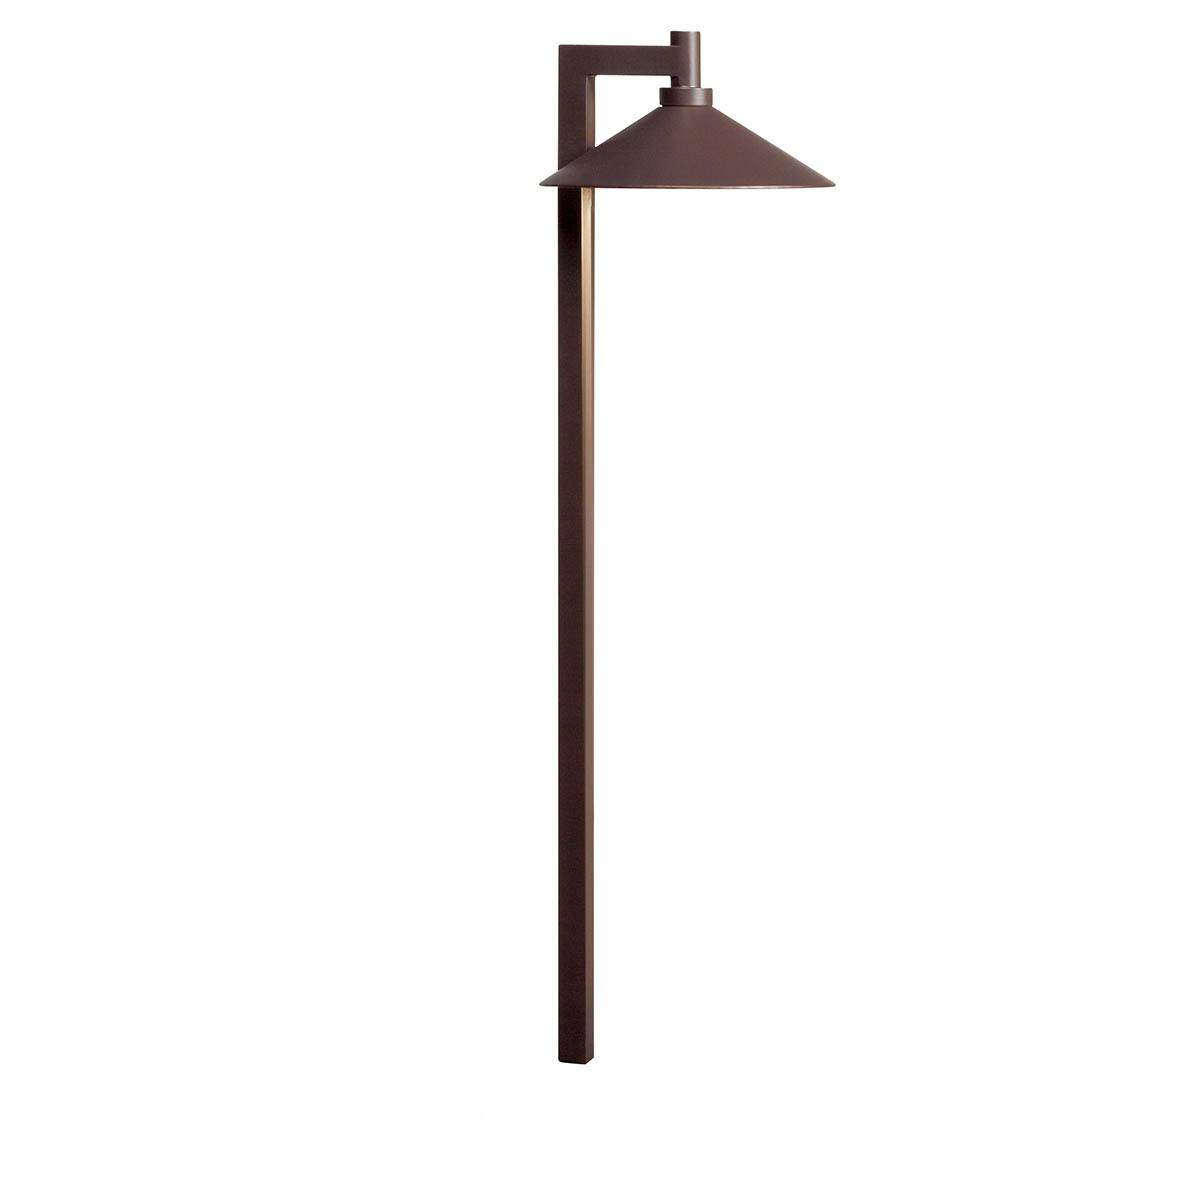 Ripley 2700K Path Light Textured Bronze on a white background